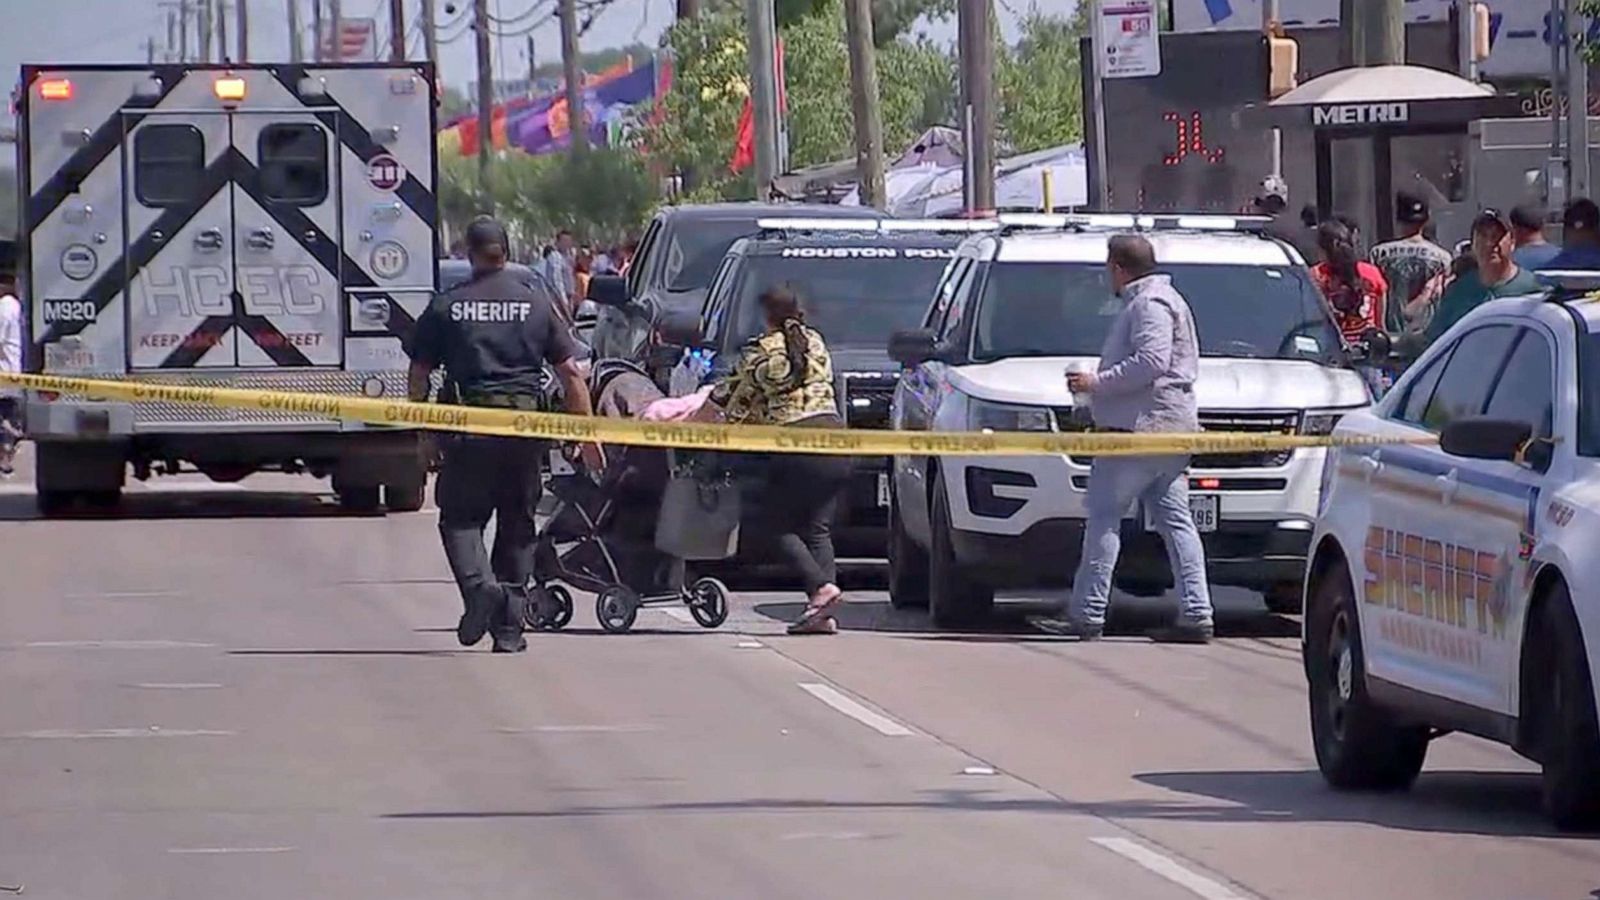 US: Shooting at Texas flea market leaves 1 minor dead, 5 injured and suspect still at large